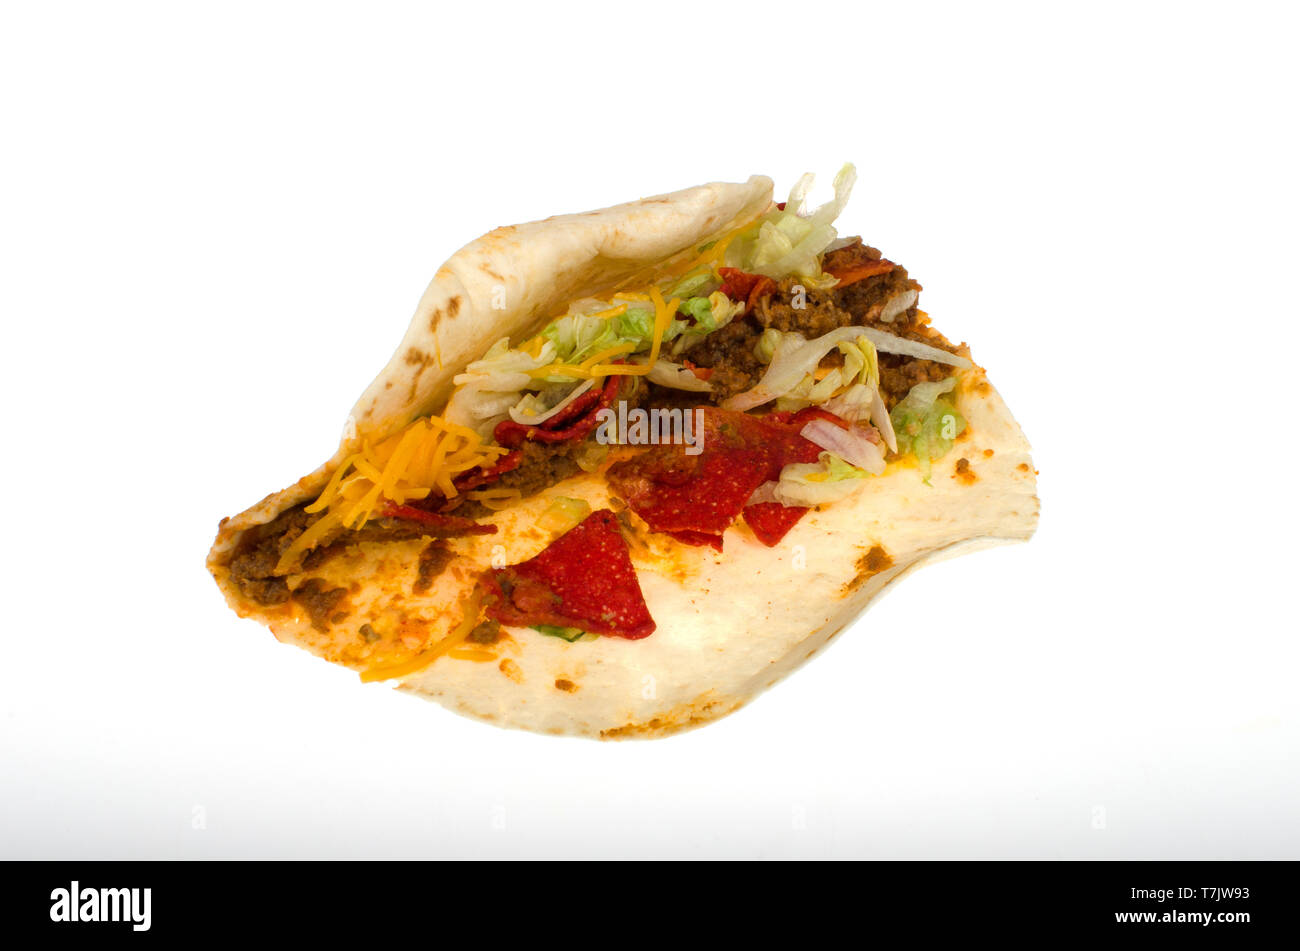 Taco Bell soft spicy Loaded Nacho Taco on white background Stock Photo